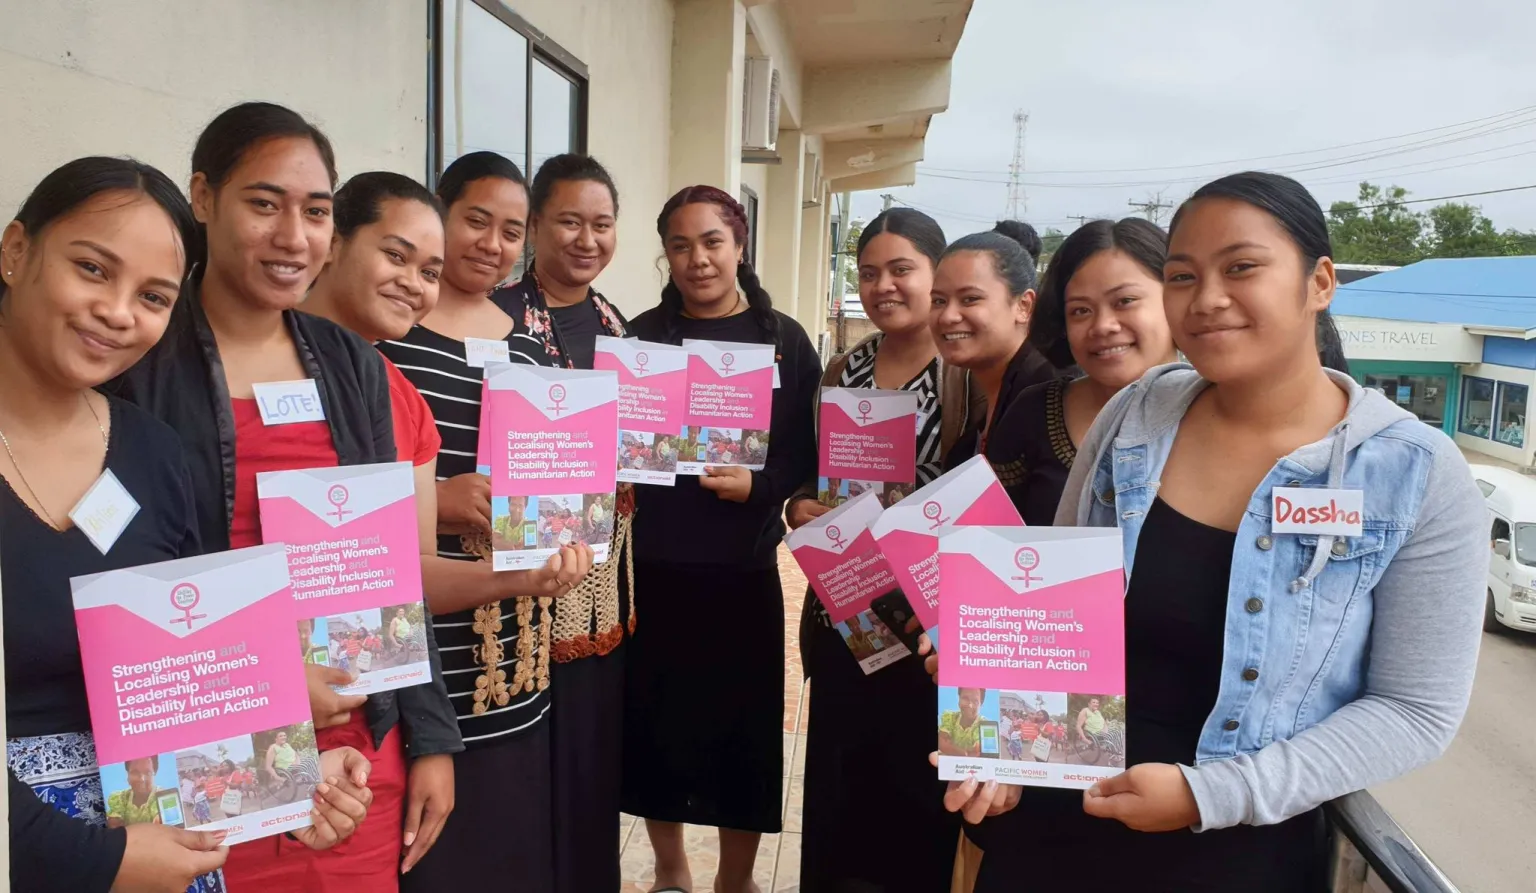 StPC invests in young women's leadership on climate action, equipping them with tools to respond to crisis. Photo credit: Shifting the Power Coalition